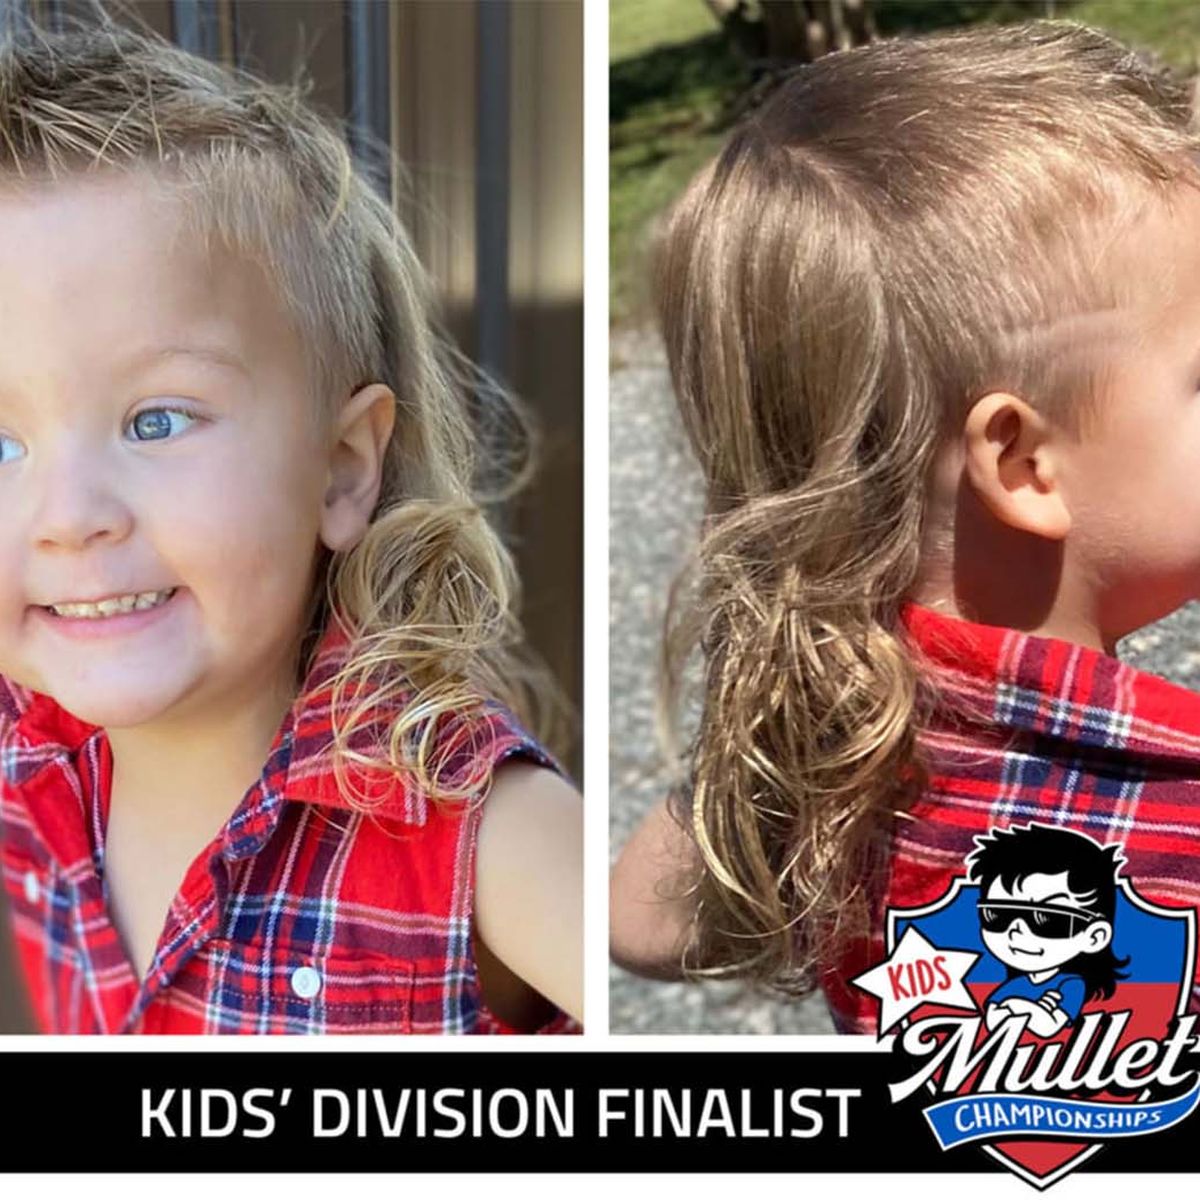 Kid's mullet competition in the US produces impressive haircut